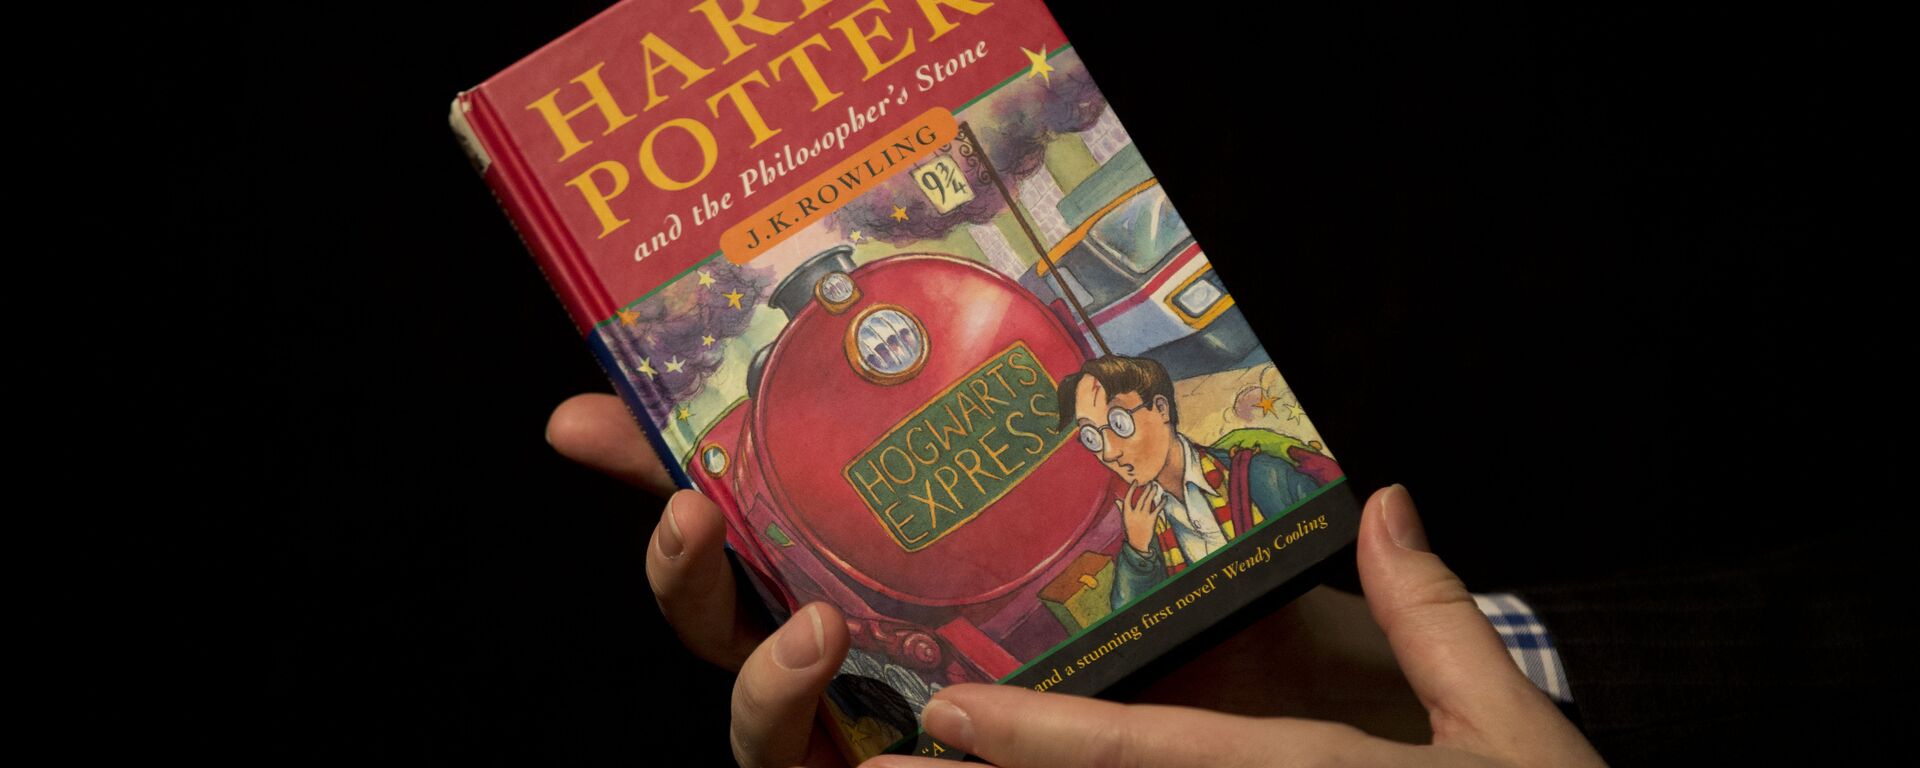 Sotheby's Director of the Department of Printed Books and Manuscripts Dr Philip Errington poses for photographers with a first edition copy of the first Harry Potter book Harry Potter and the Philosopher's Stone. - Sputnik International, 1920, 11.01.2023